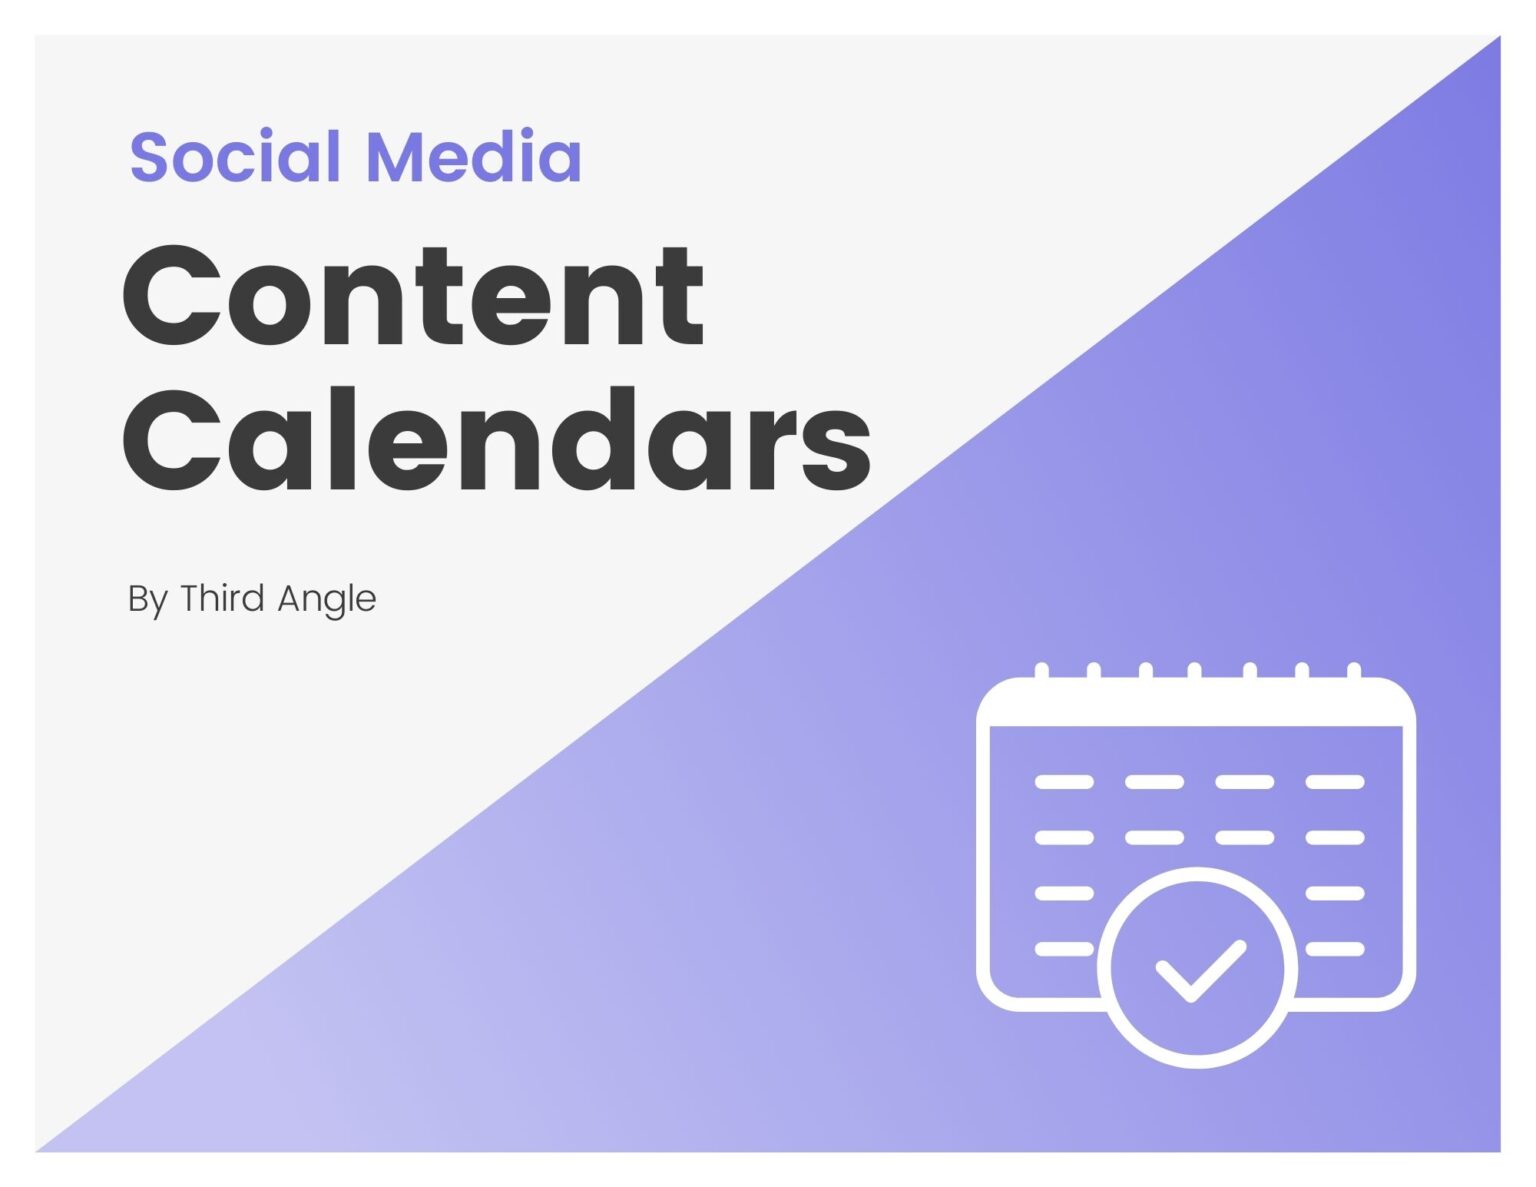 [TEMPLATE] Social Media Content Calendars for Small Businesses